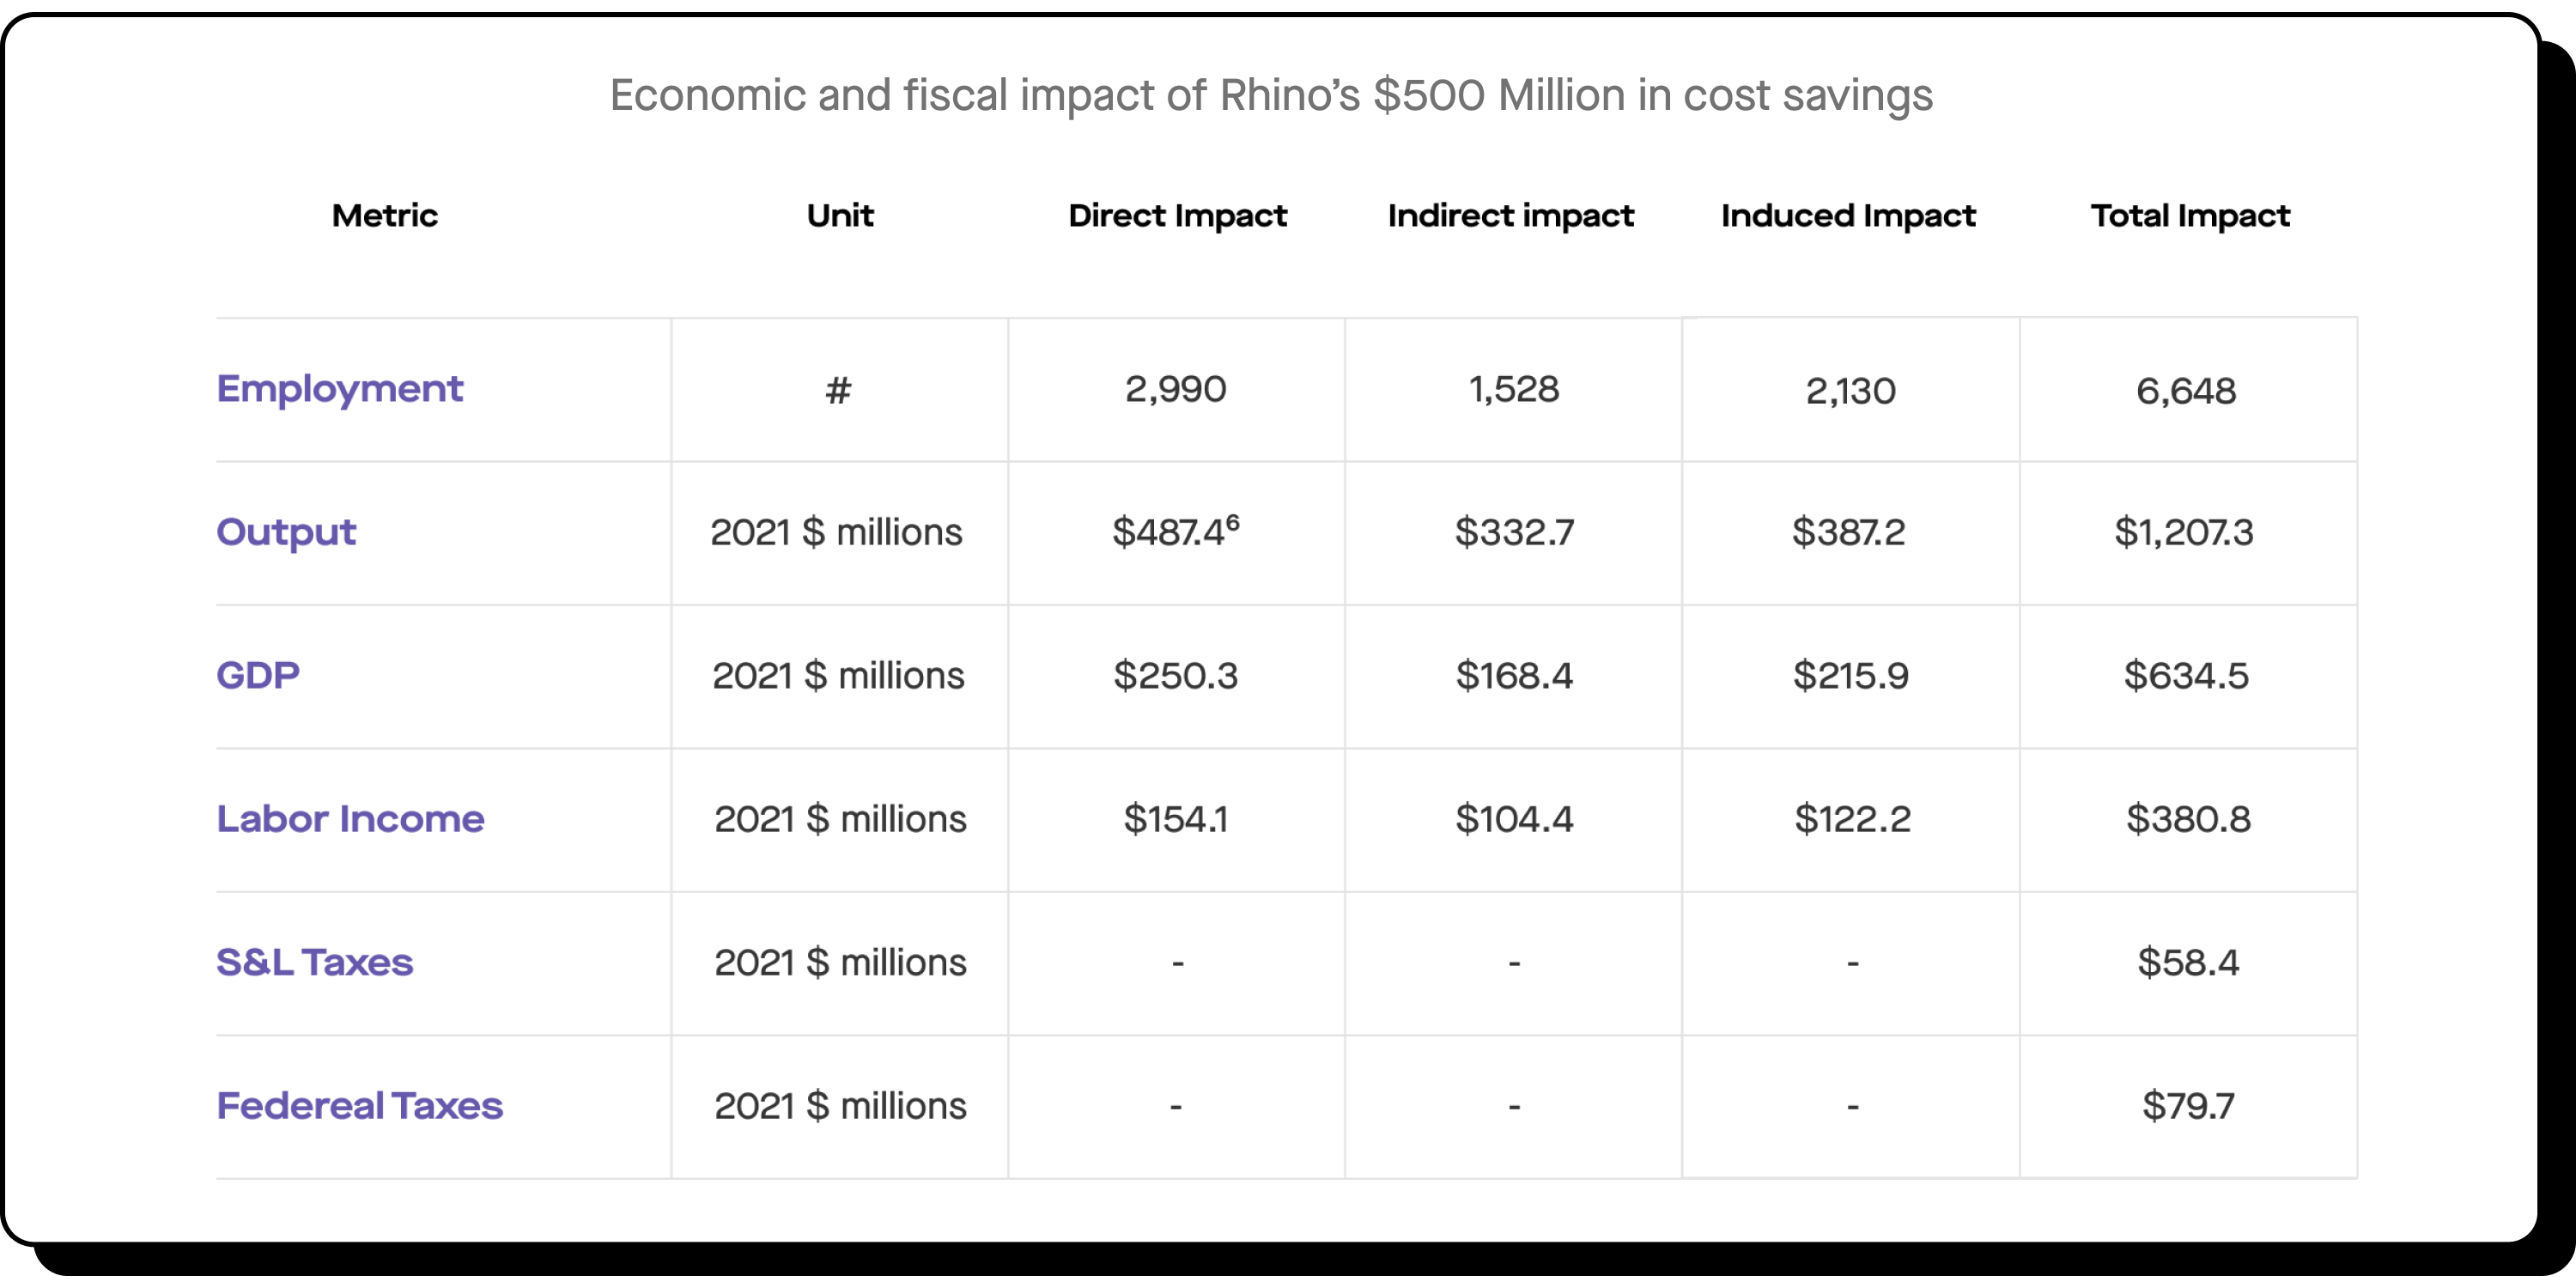 A graph that shows the economic and fiscal impact of $500 million in cost savings for Rhino renters